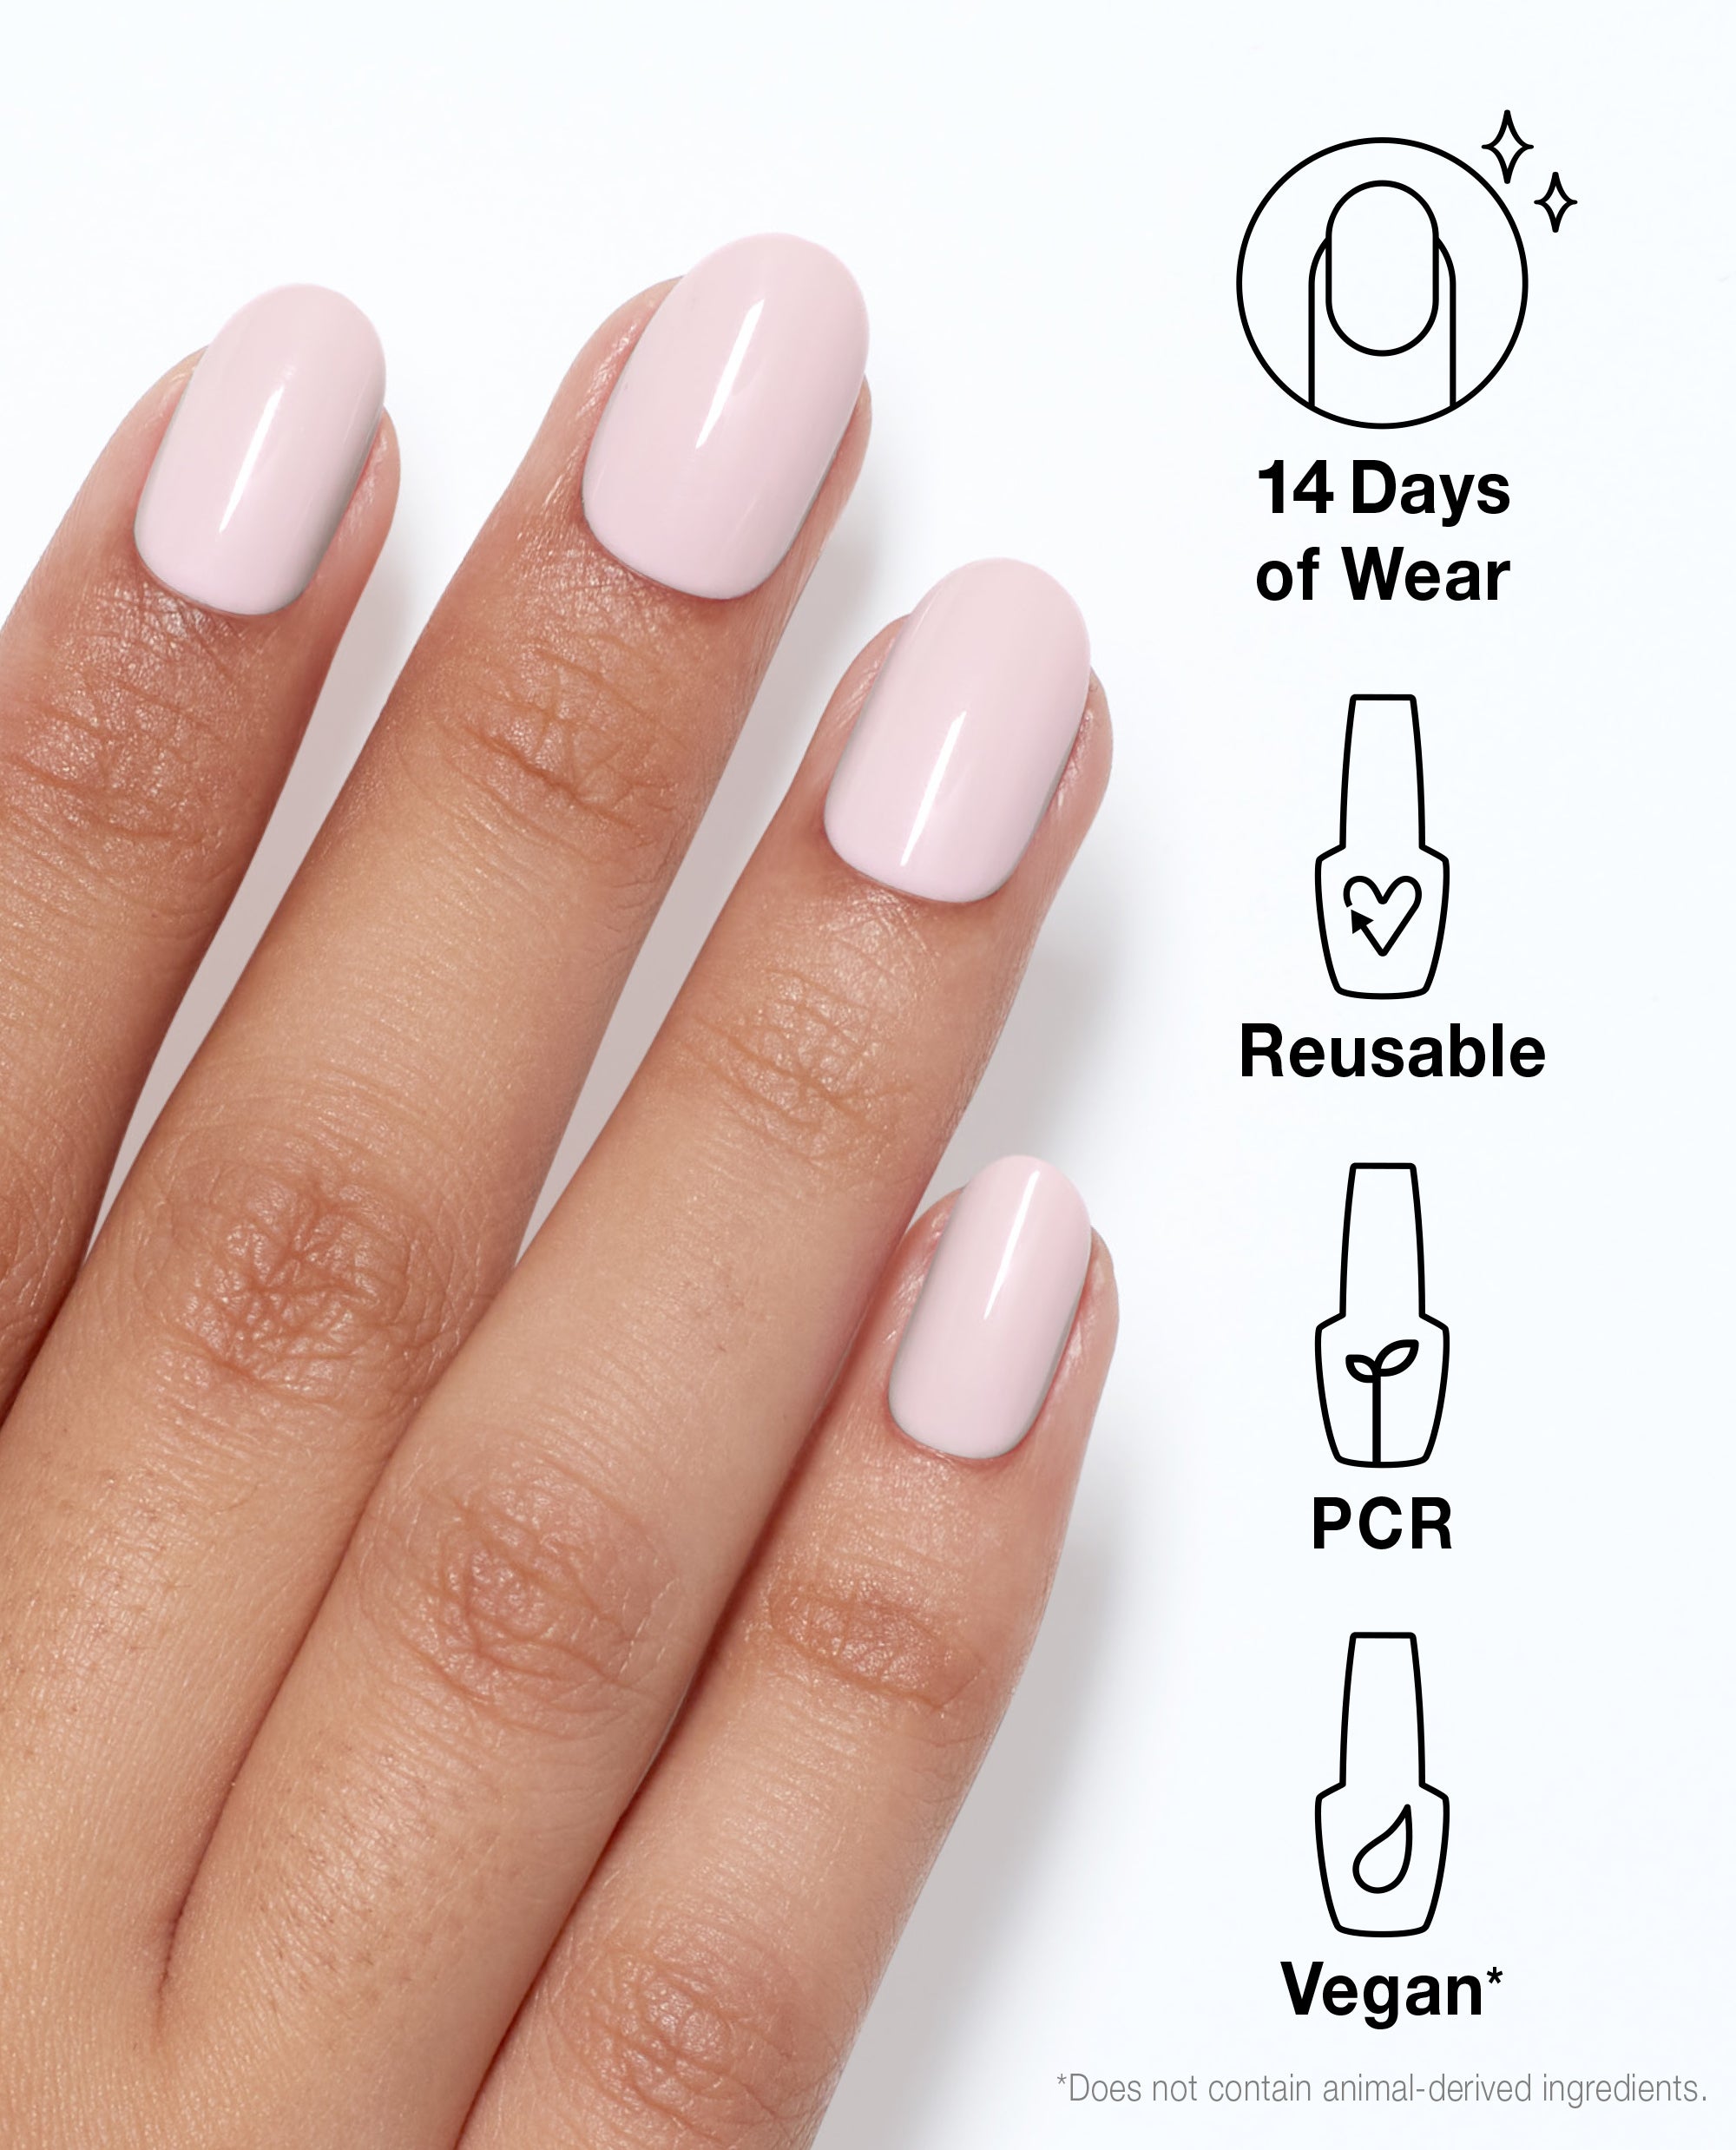 What are the benefits of manicures - pedicures?